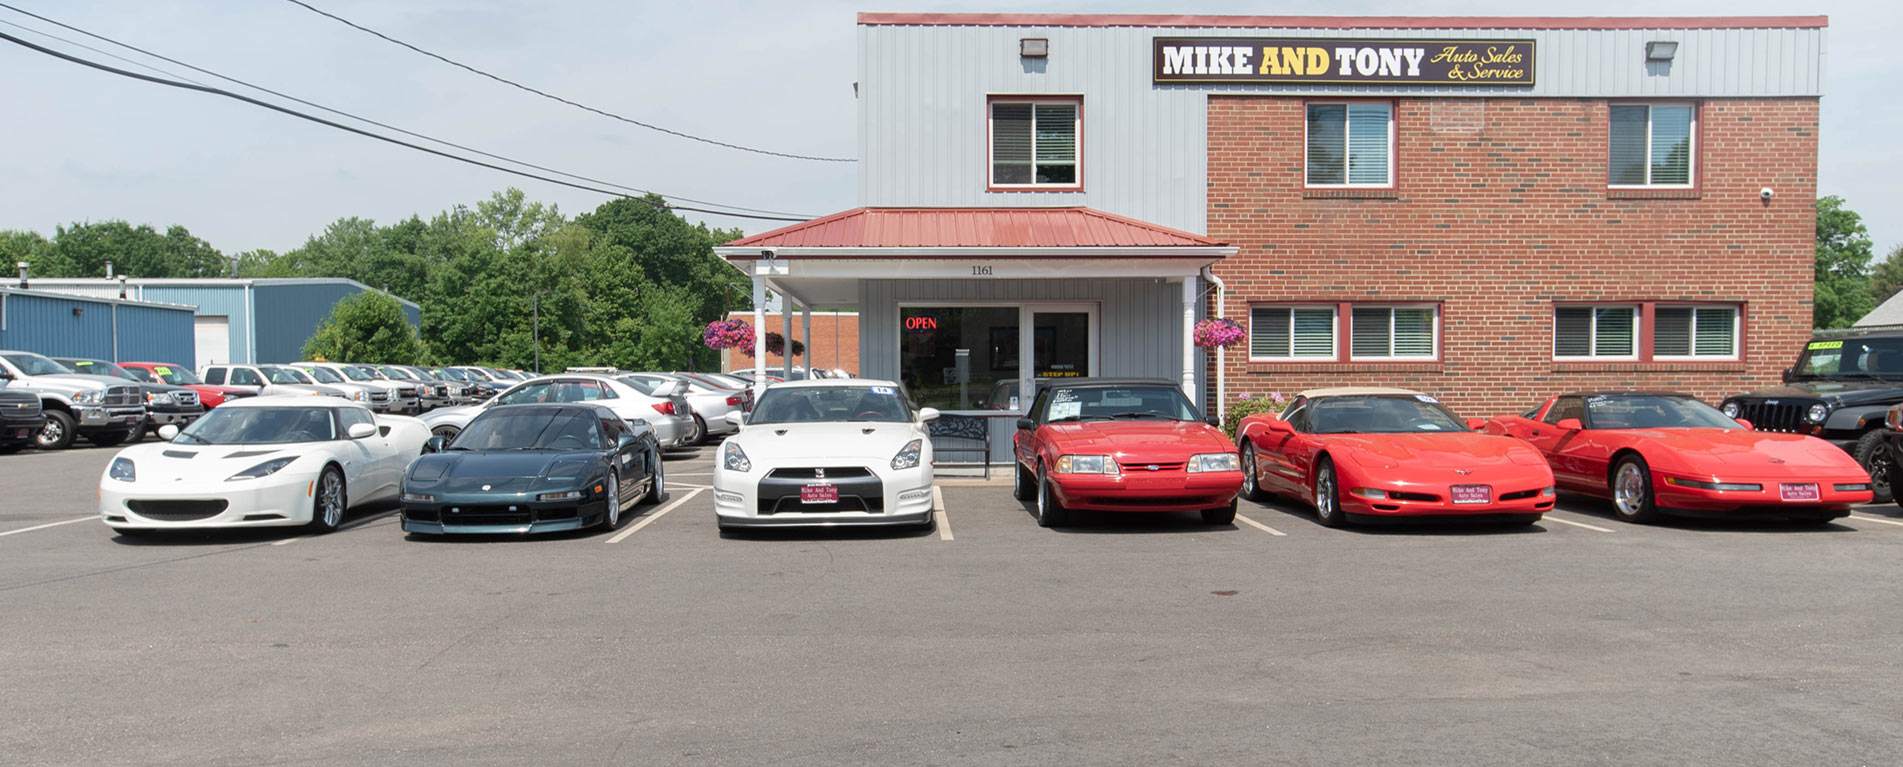 Used cars for sale in South Windsor | Mike And Tony Auto Sales, Inc. South Windsor Connecticut